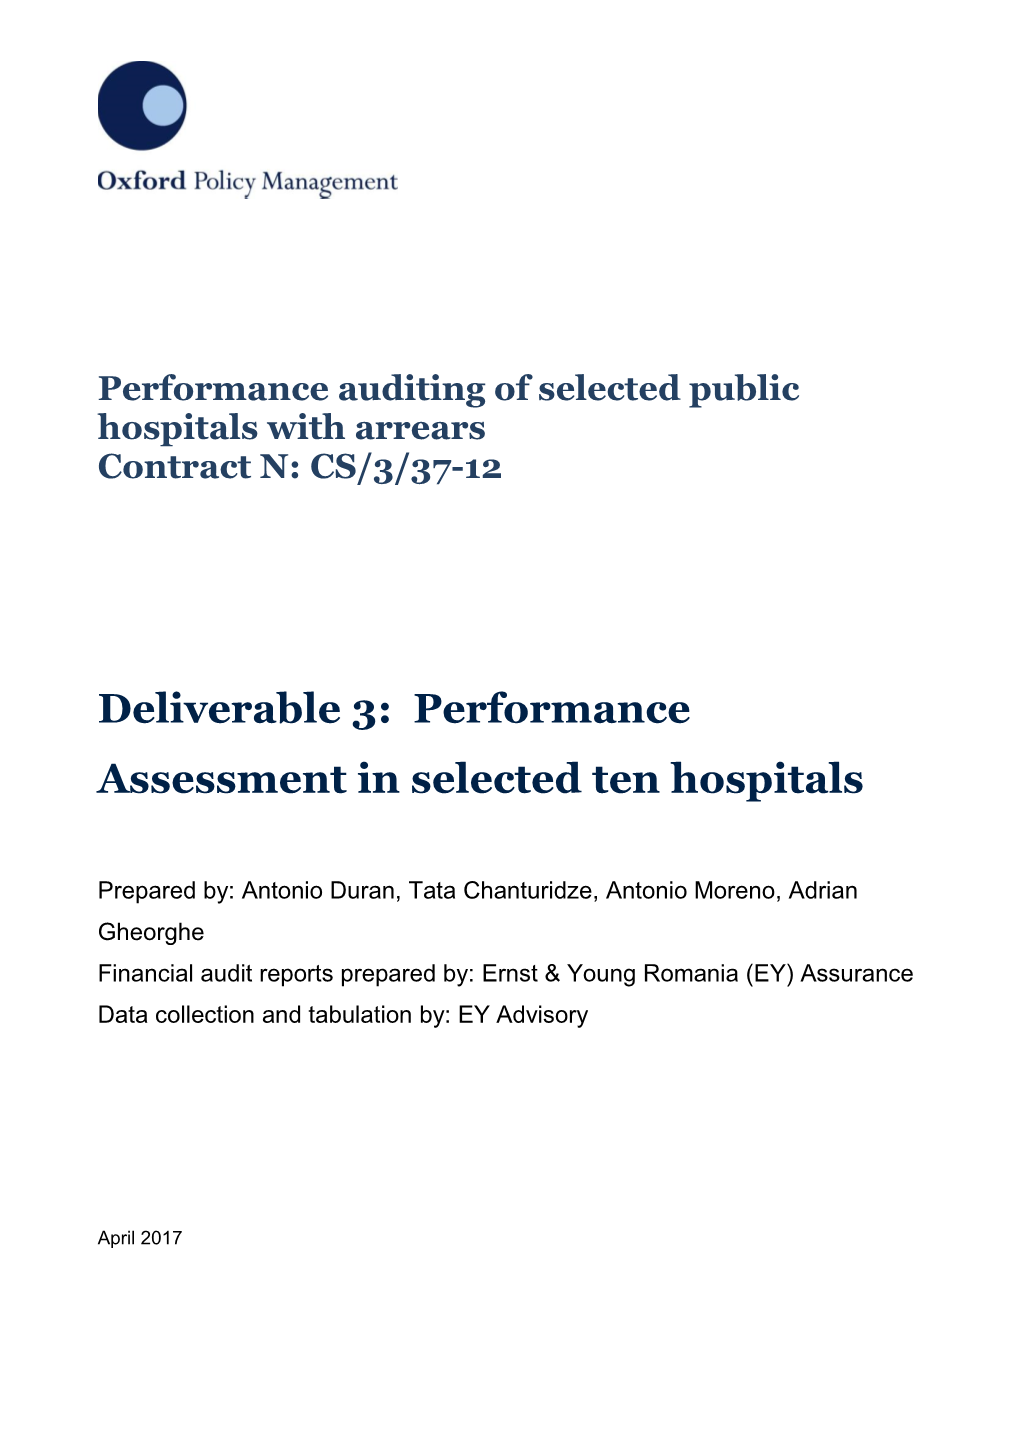 Deliverable 3: Performance Assessment in Selected Ten Hospitals